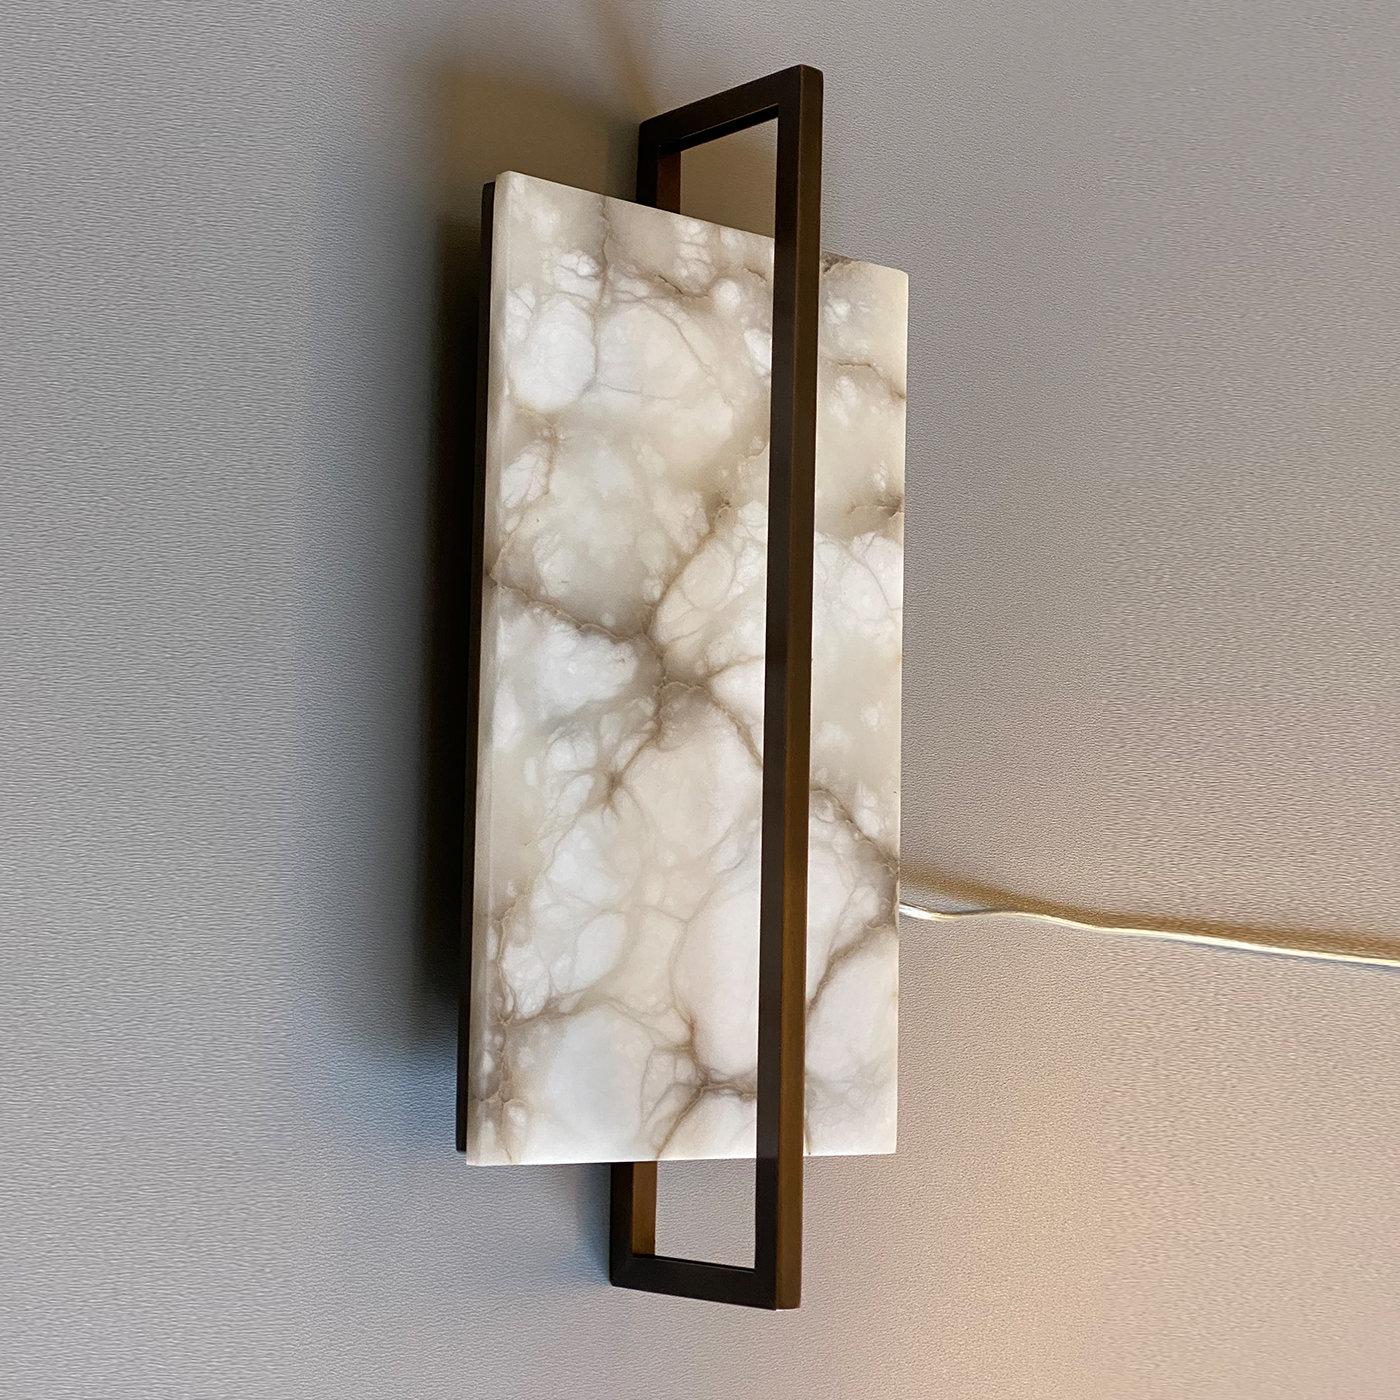 A truly stunning combination of contemporary lighting design and classic Italian stone craftsmanship, this splendid Tile Sconce is a distinctive piece for any contemporary or traditional interior. The sconce features an elegant vertical rectangle in